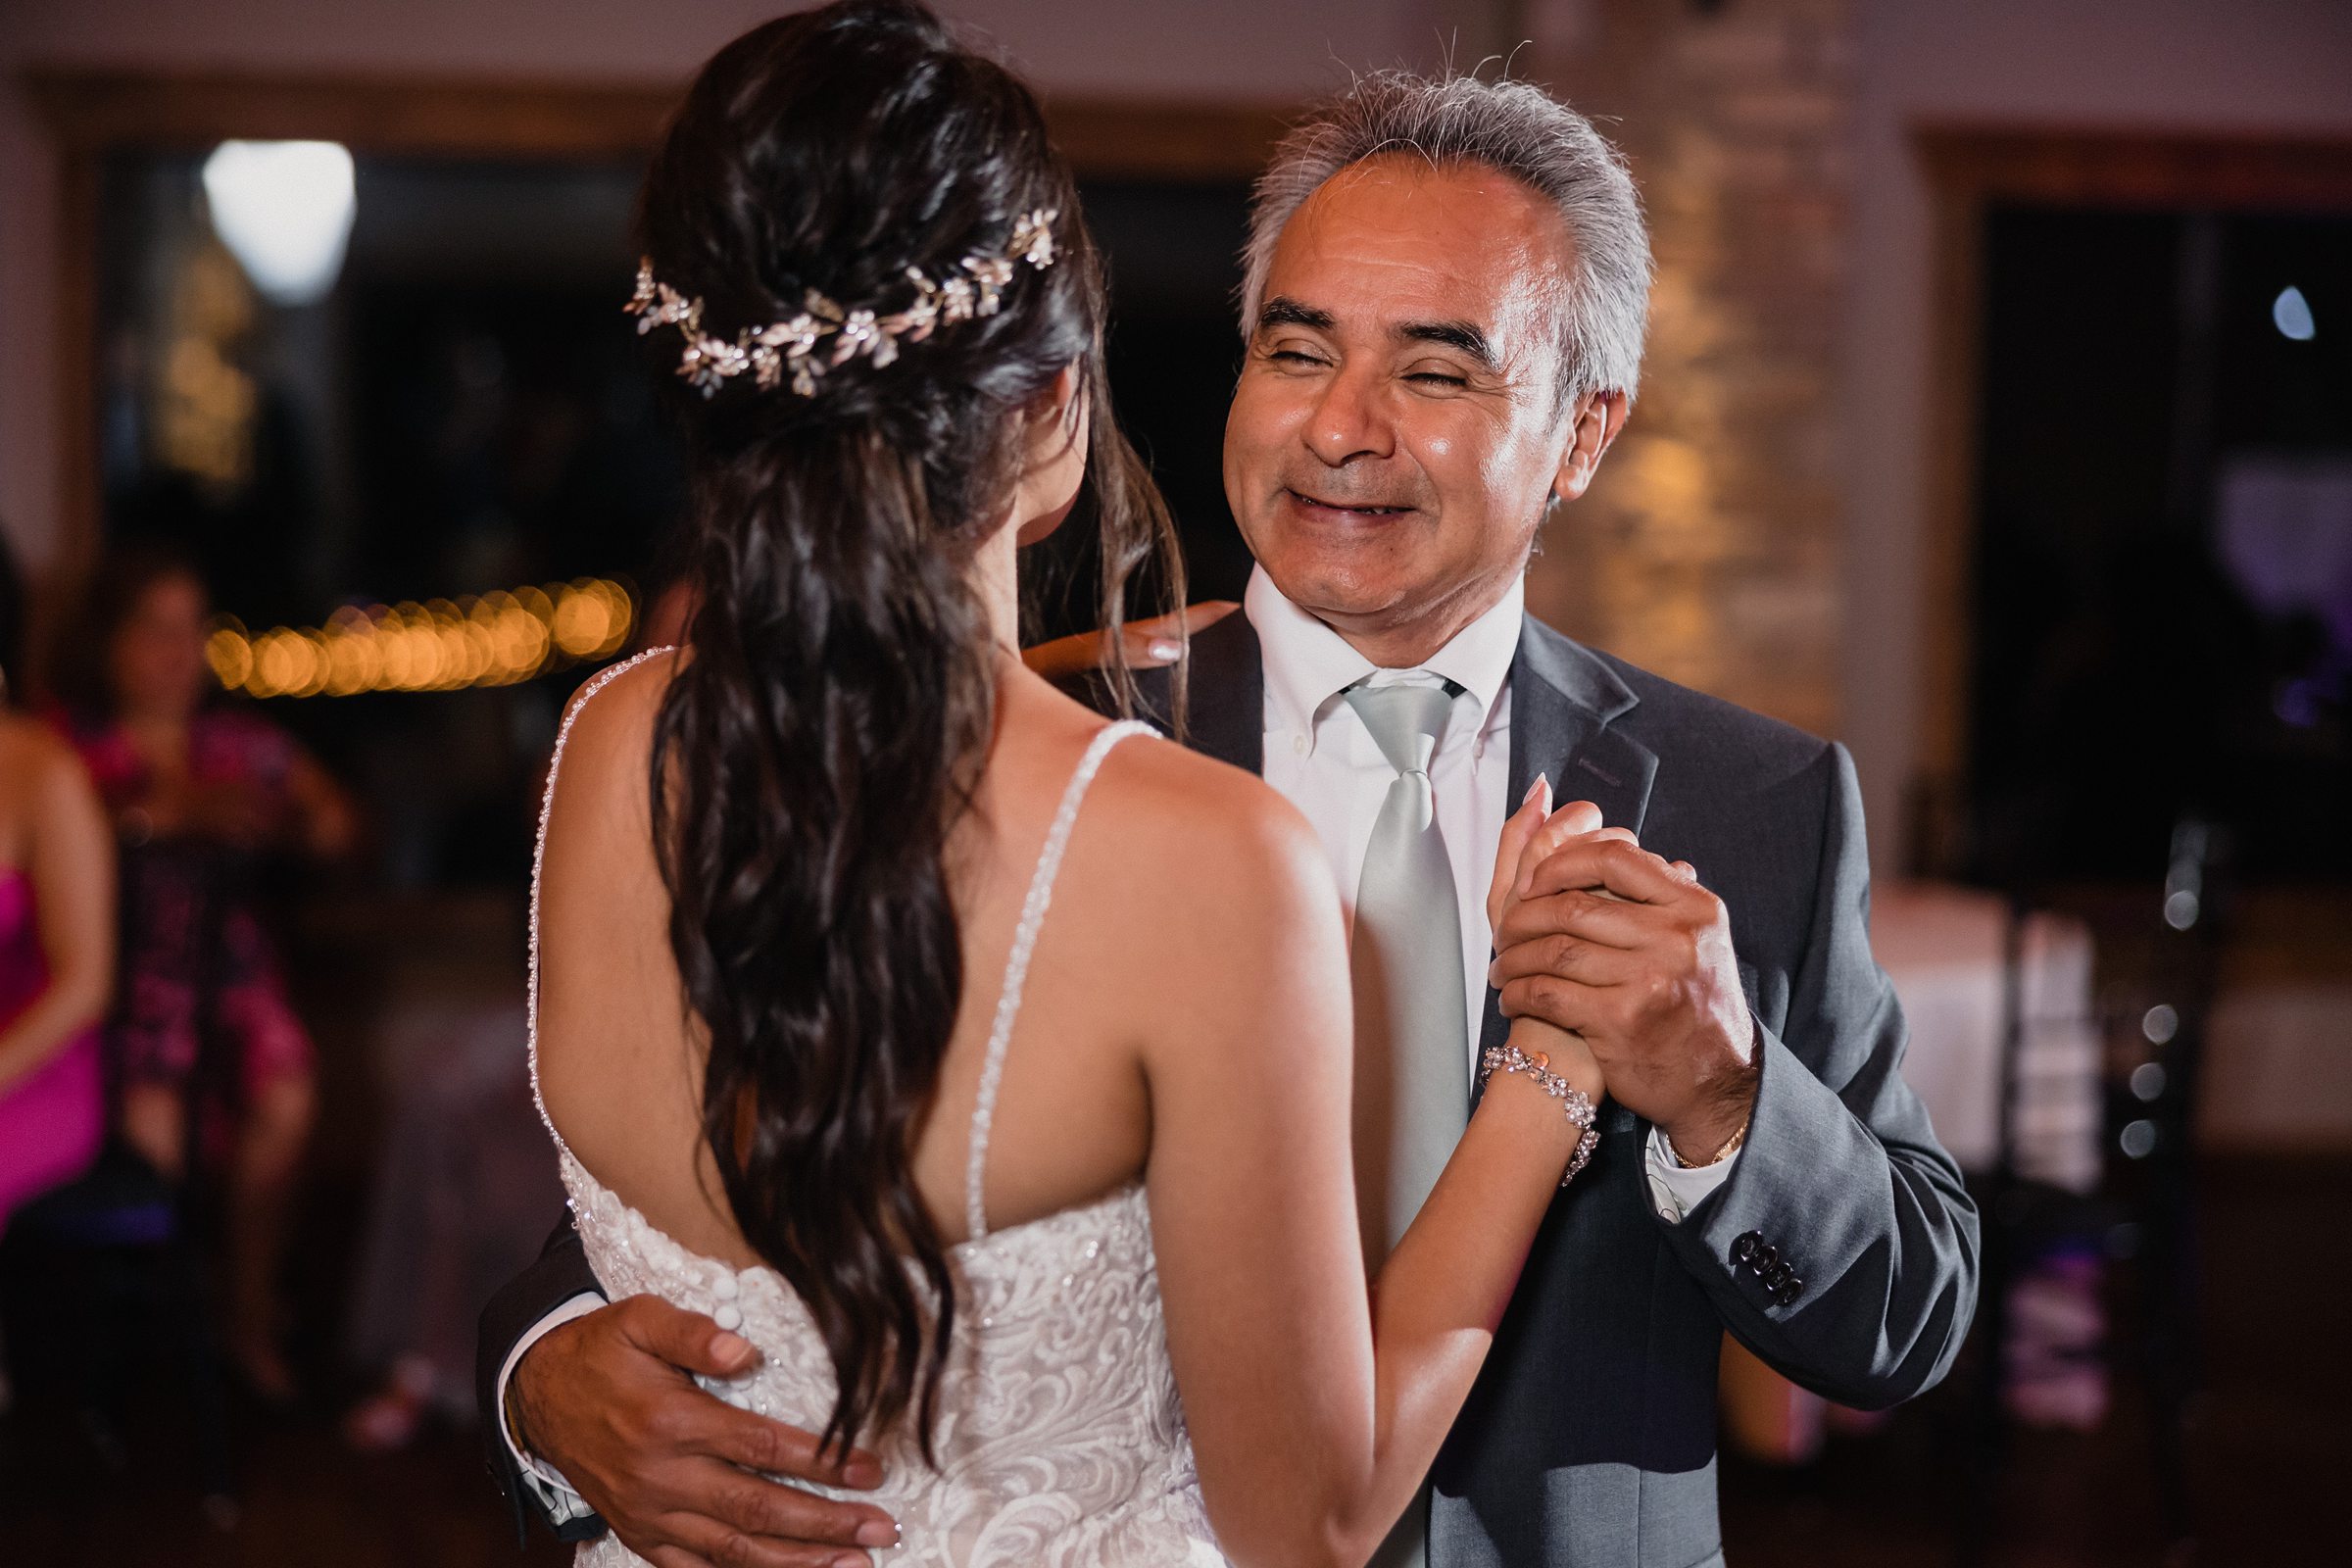 Bride dances with her dad during her wedding at the Fisherman's Inn in Elburn, Illinois.